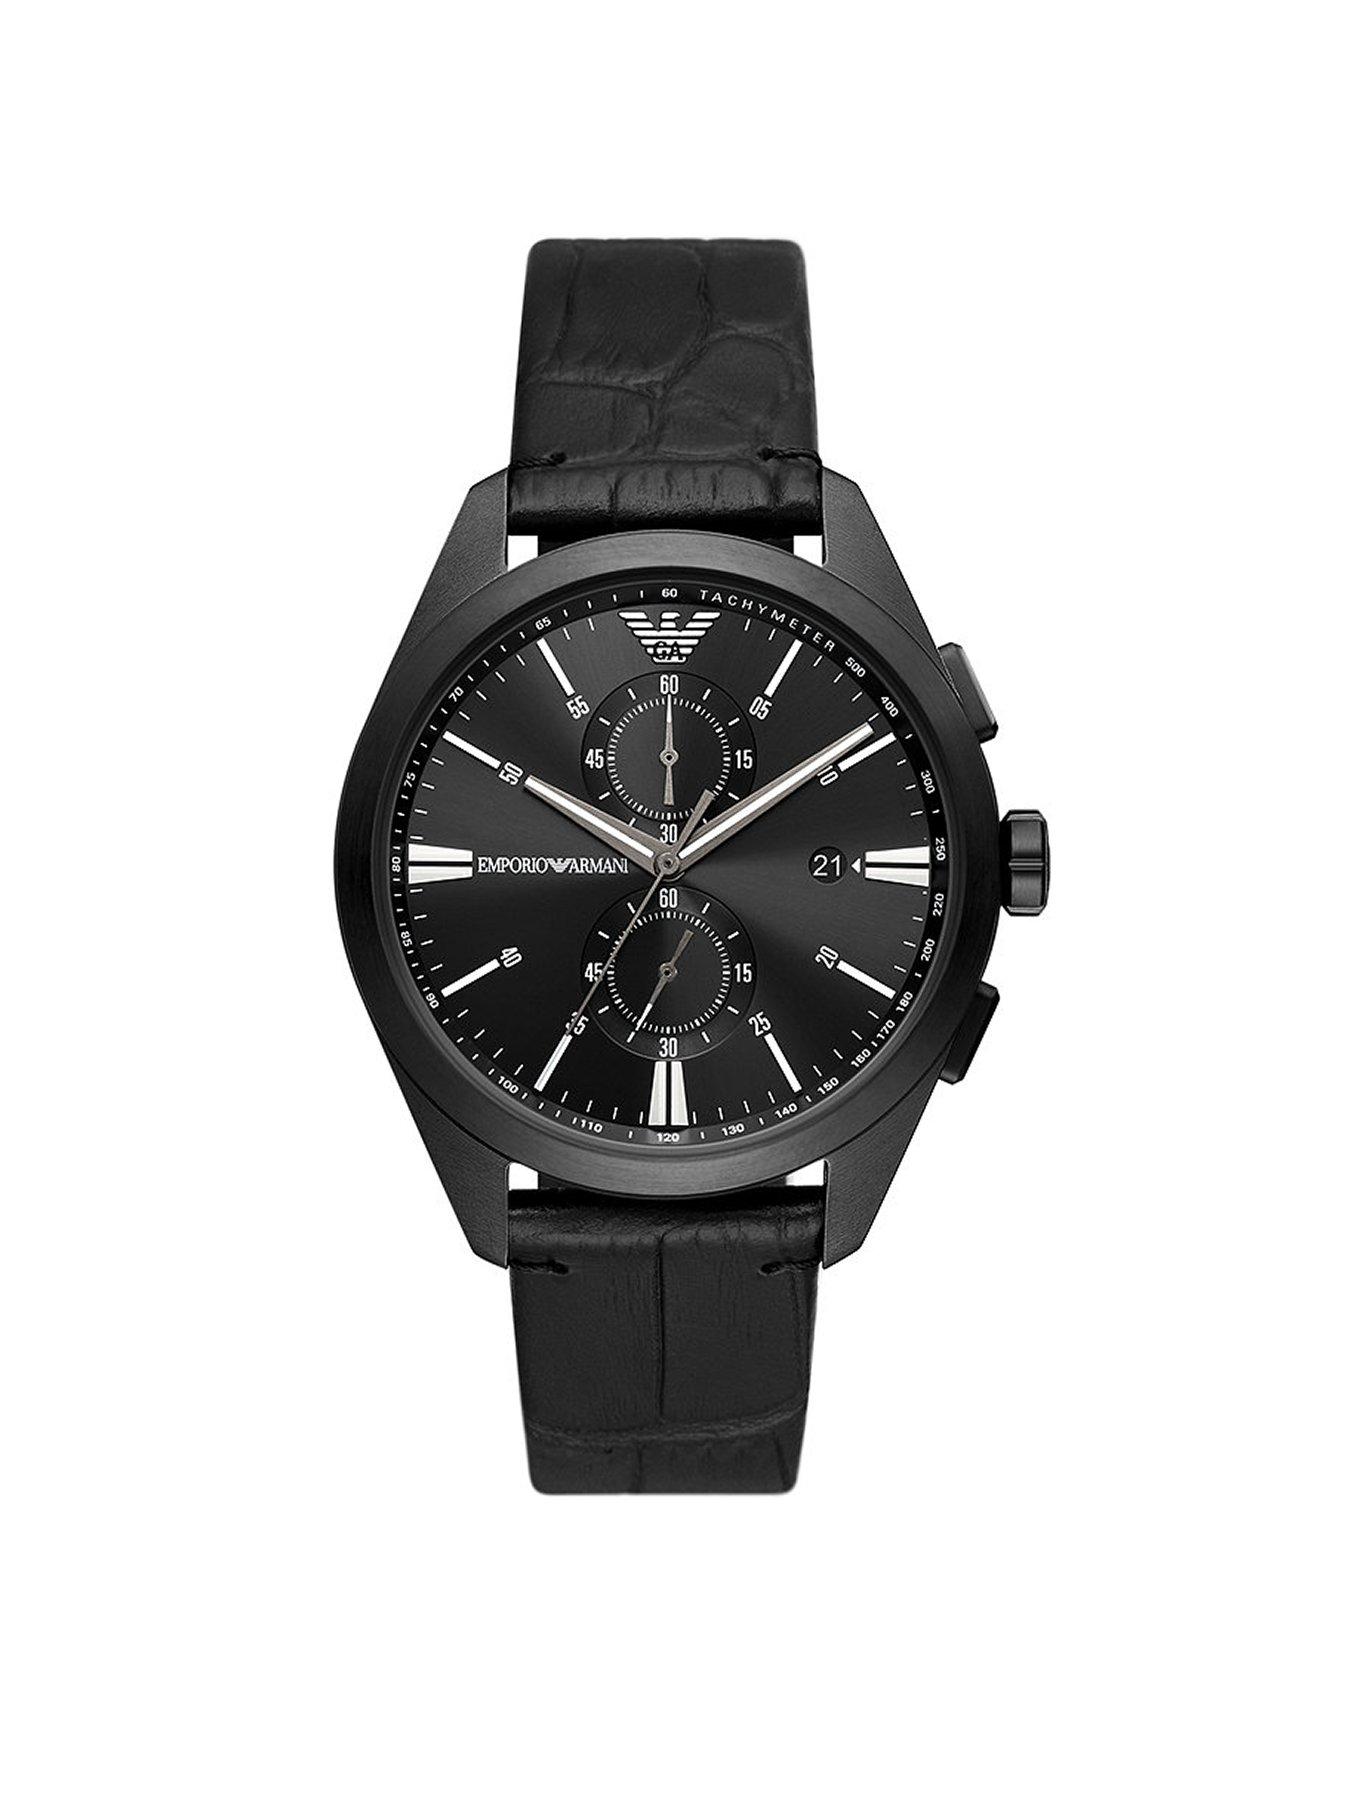 Leather | Watches | Jewellery & watches | Men | www.littlewoods.com